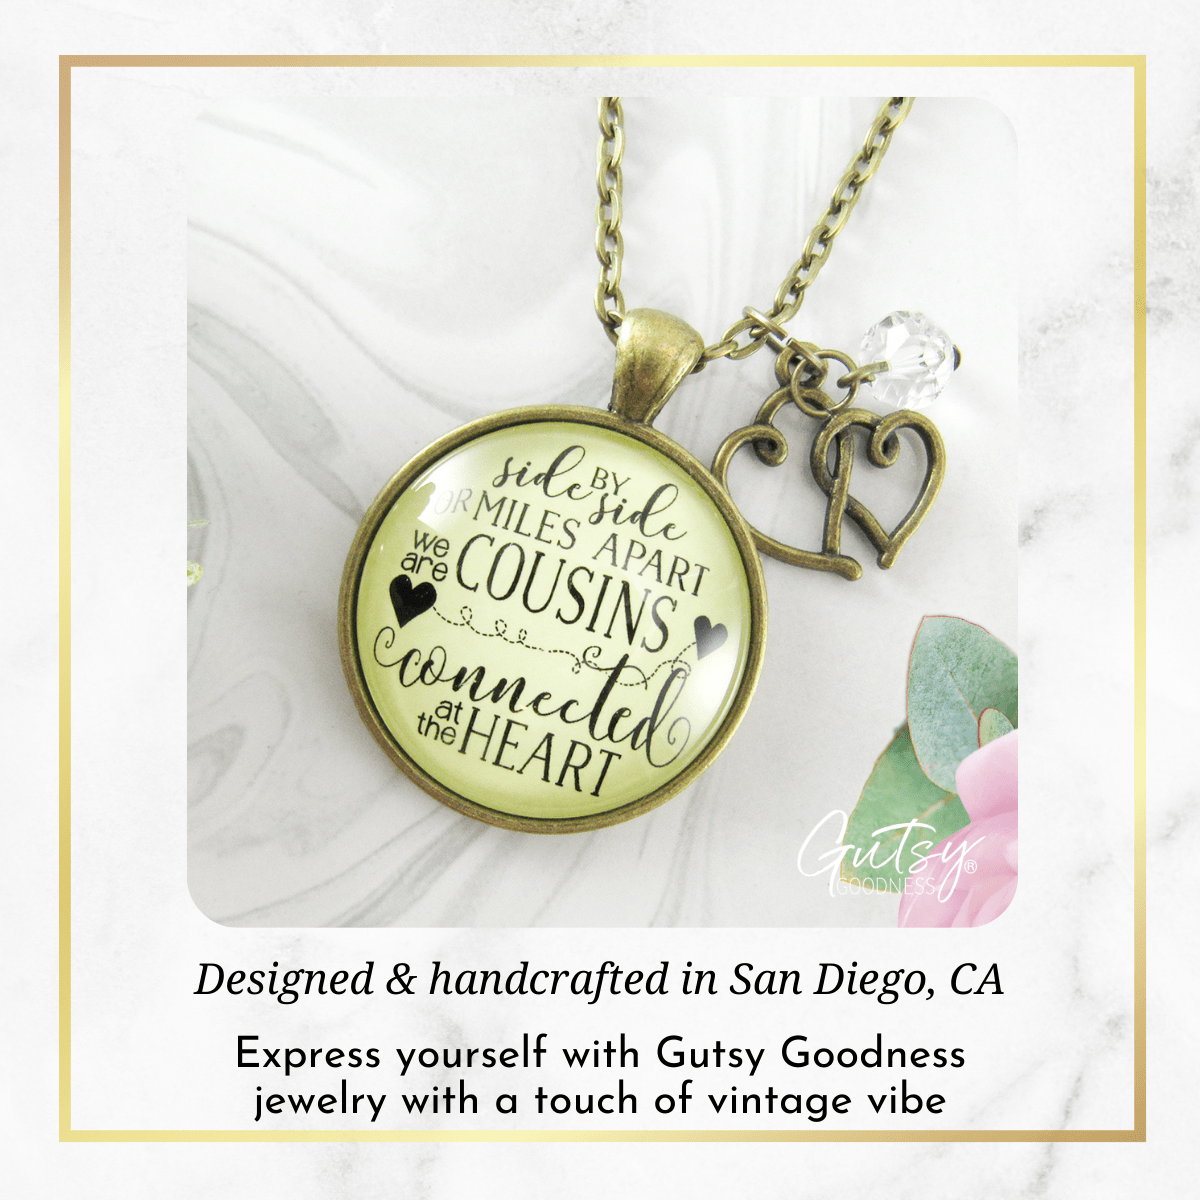 Gutsy Goodness Cousin Necklace Side by Side Long Distance Family Heart Jewelry Gift Open Heart - Gutsy Goodness;Cousin Necklace Side By Side Long Distance Family Heart Jewelry Gift Open Heart - Gutsy Goodness Handmade Jewelry Gifts